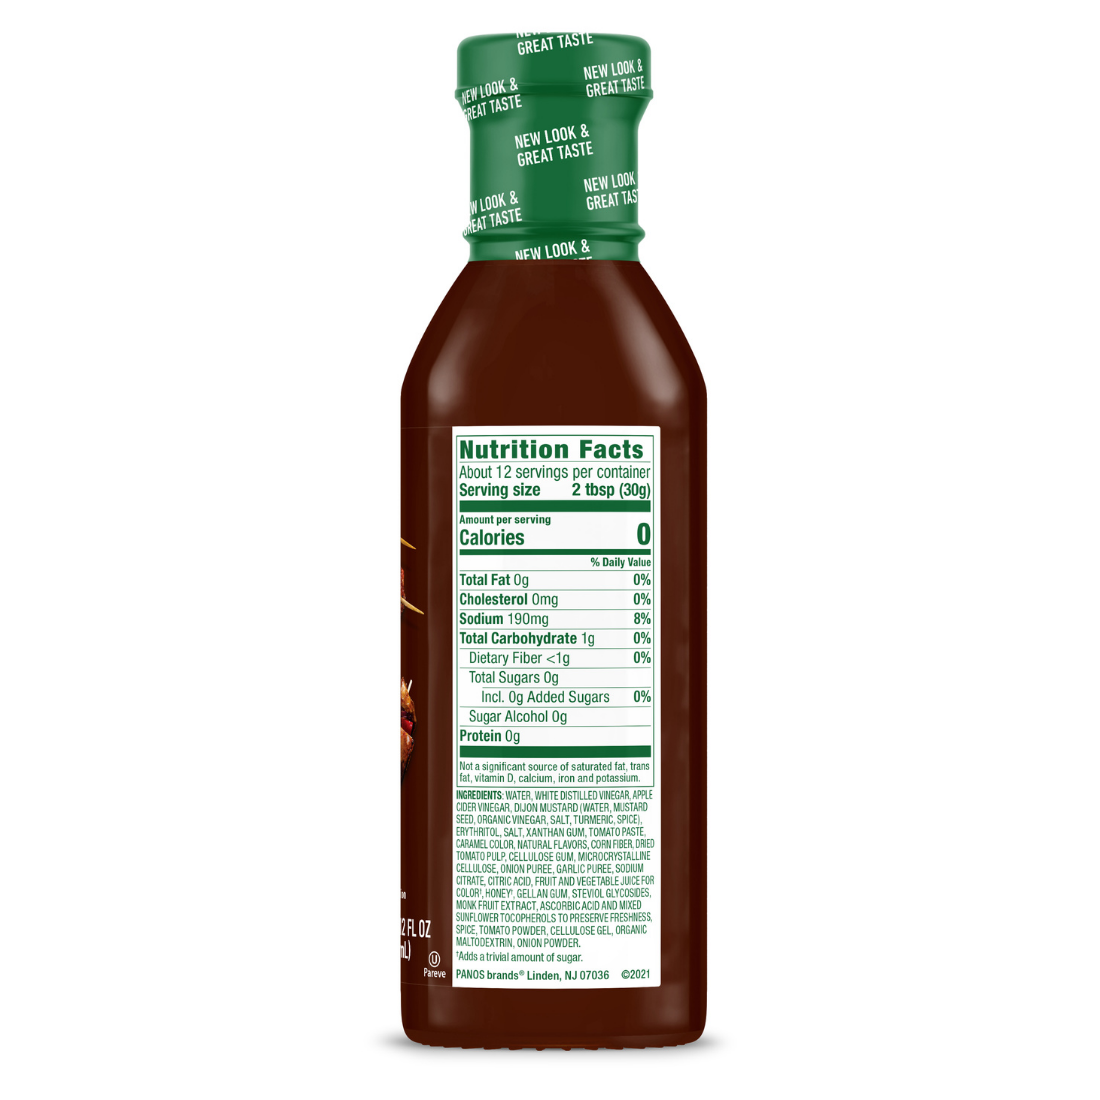 Hickory Farms Honey And Pineapple Mustard: Calories, Nutrition